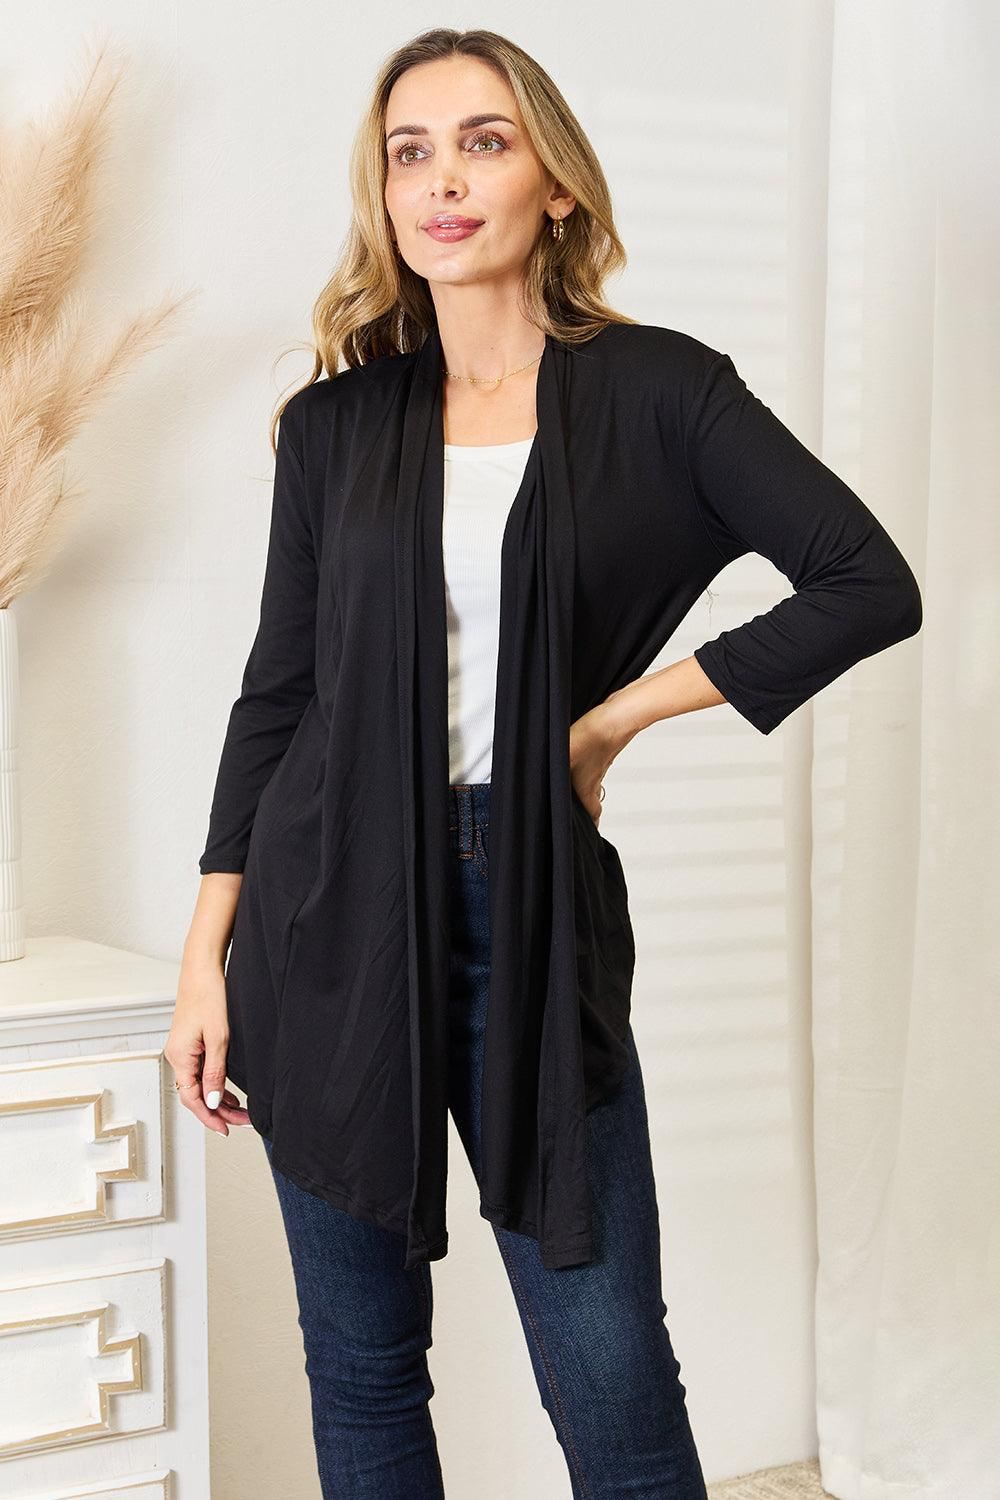 3 4 Sleeve Open Front Cardigan - Inspired Eye Boutique